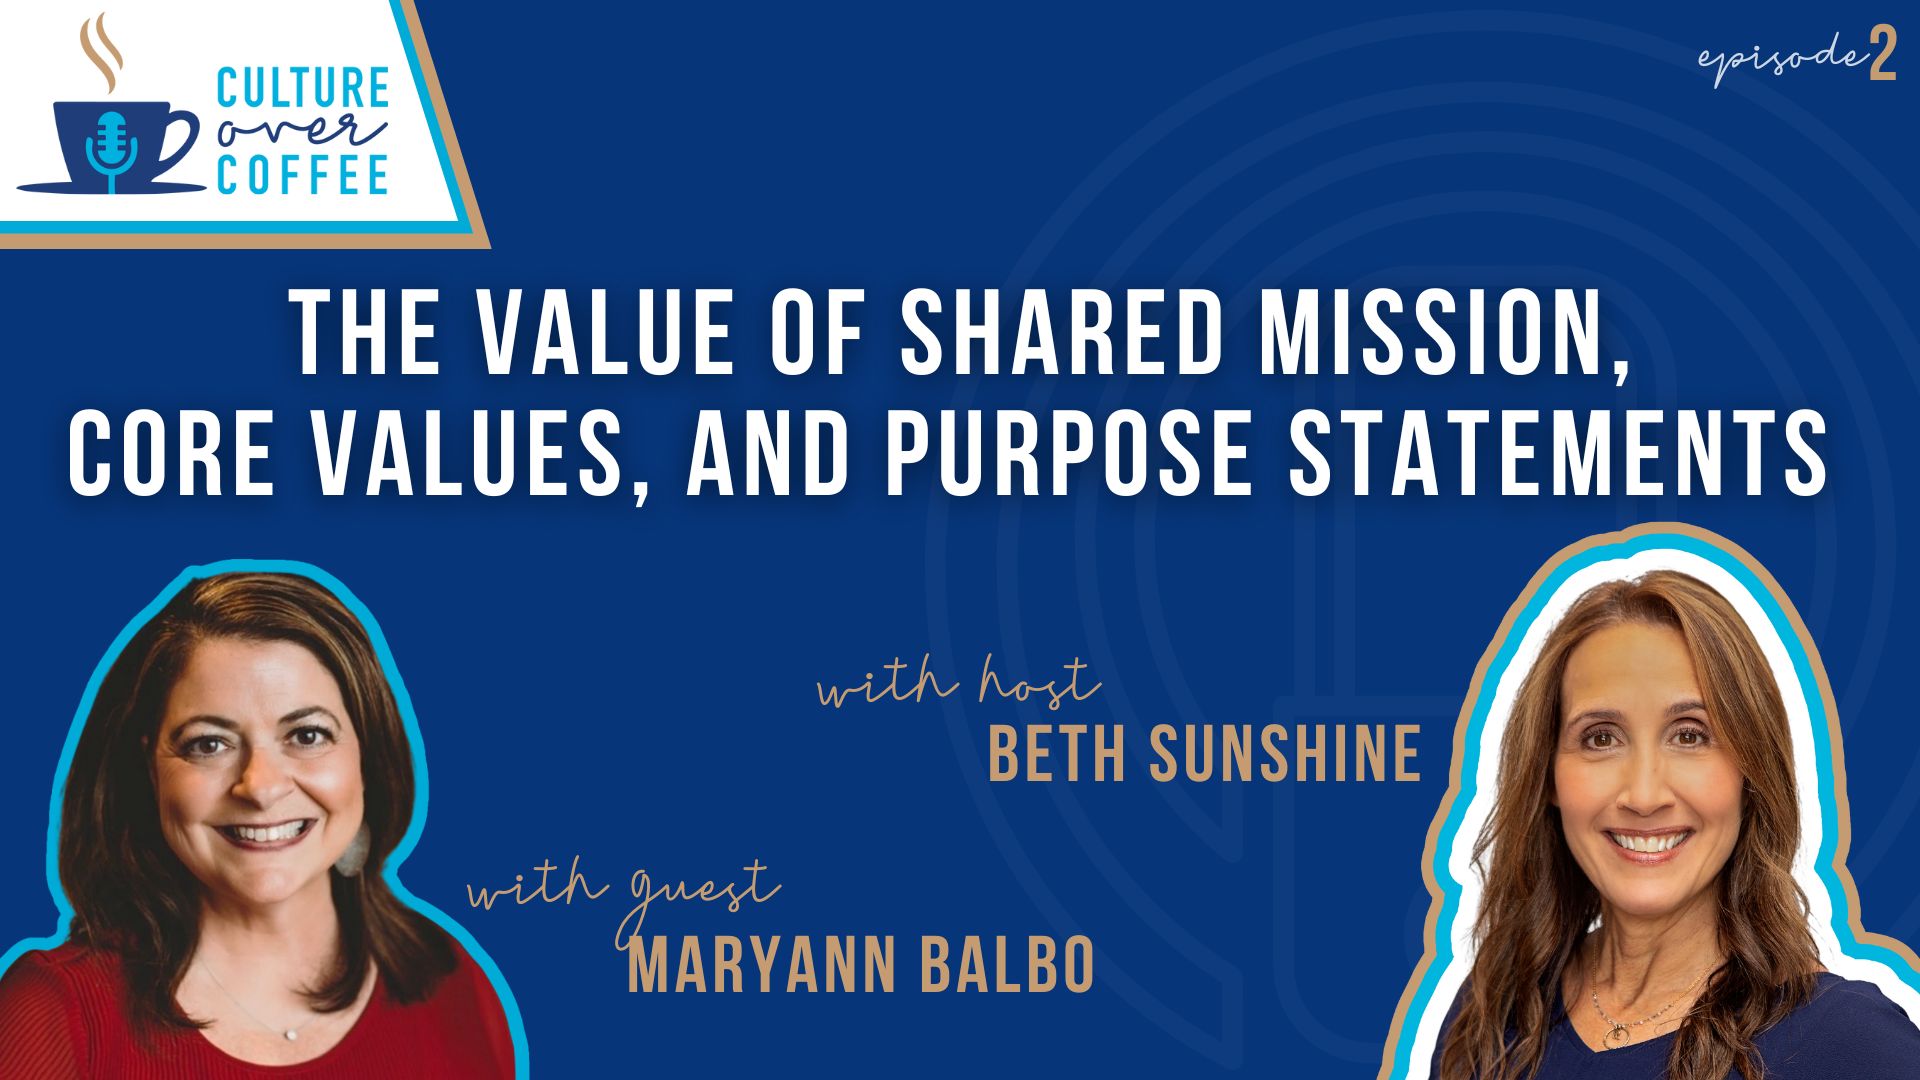 Culture Over Coffee – The Value of Shared Mission, Core Values, and Purpose Statements with Maryann Balbo